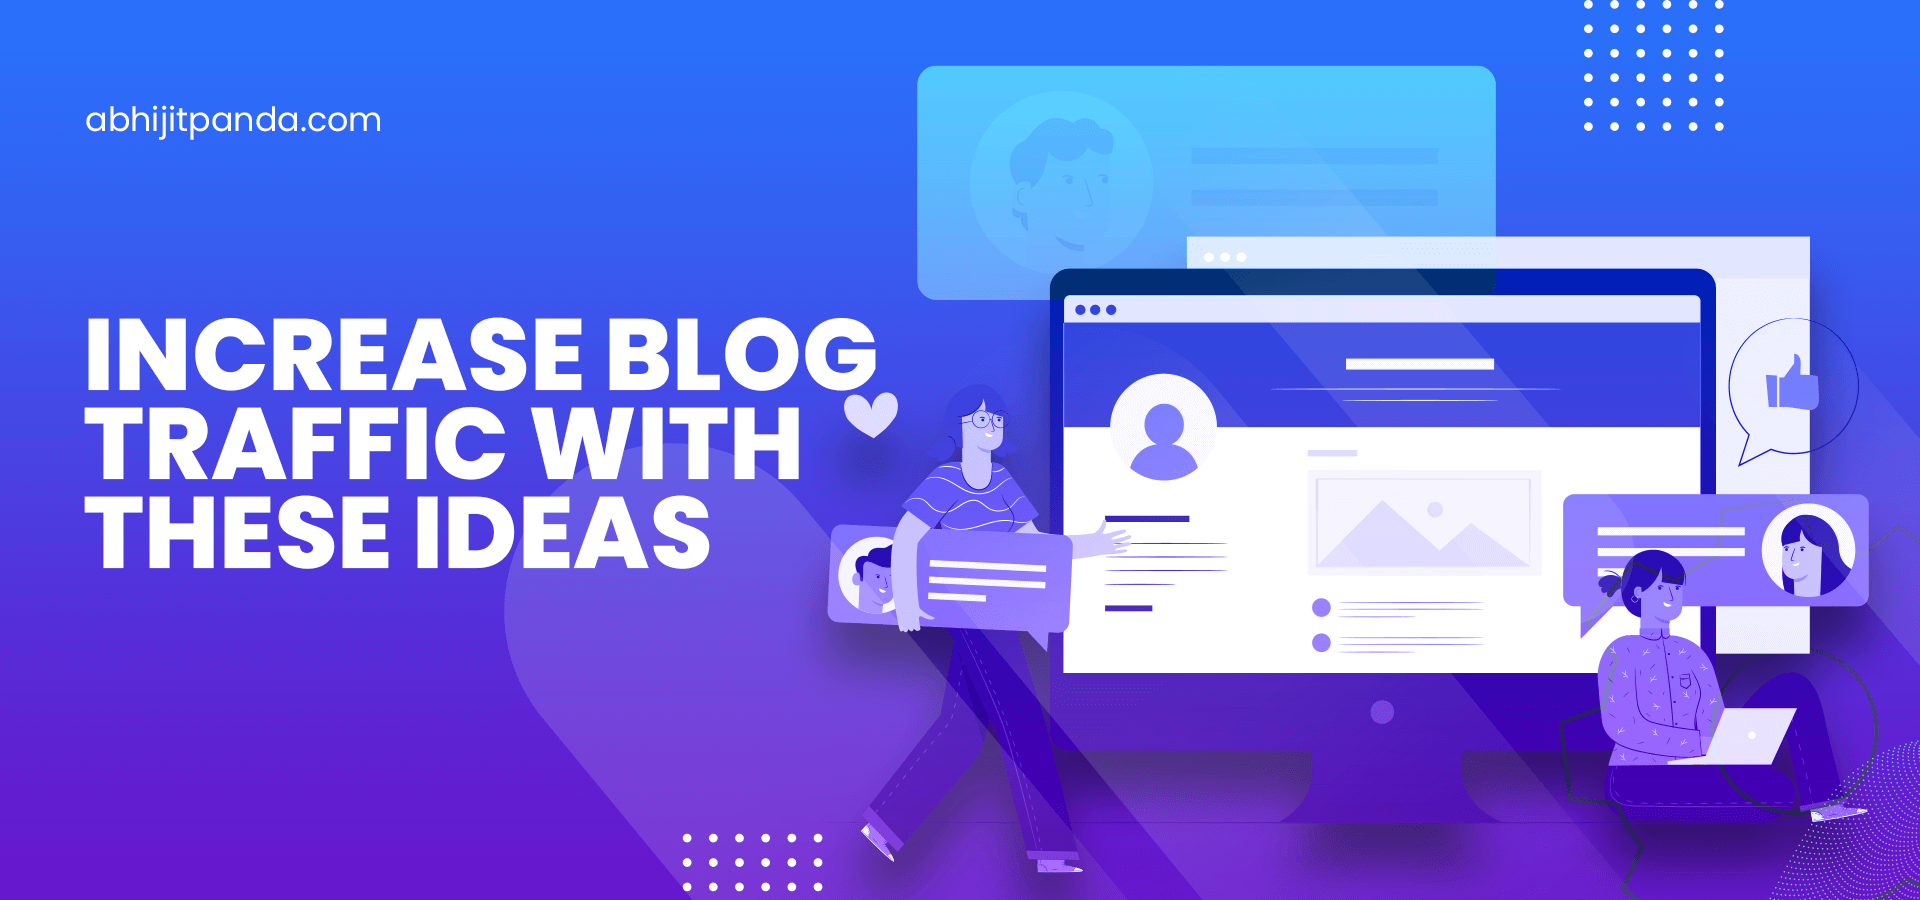 Increase Blog Traffic with These 9 Ideas